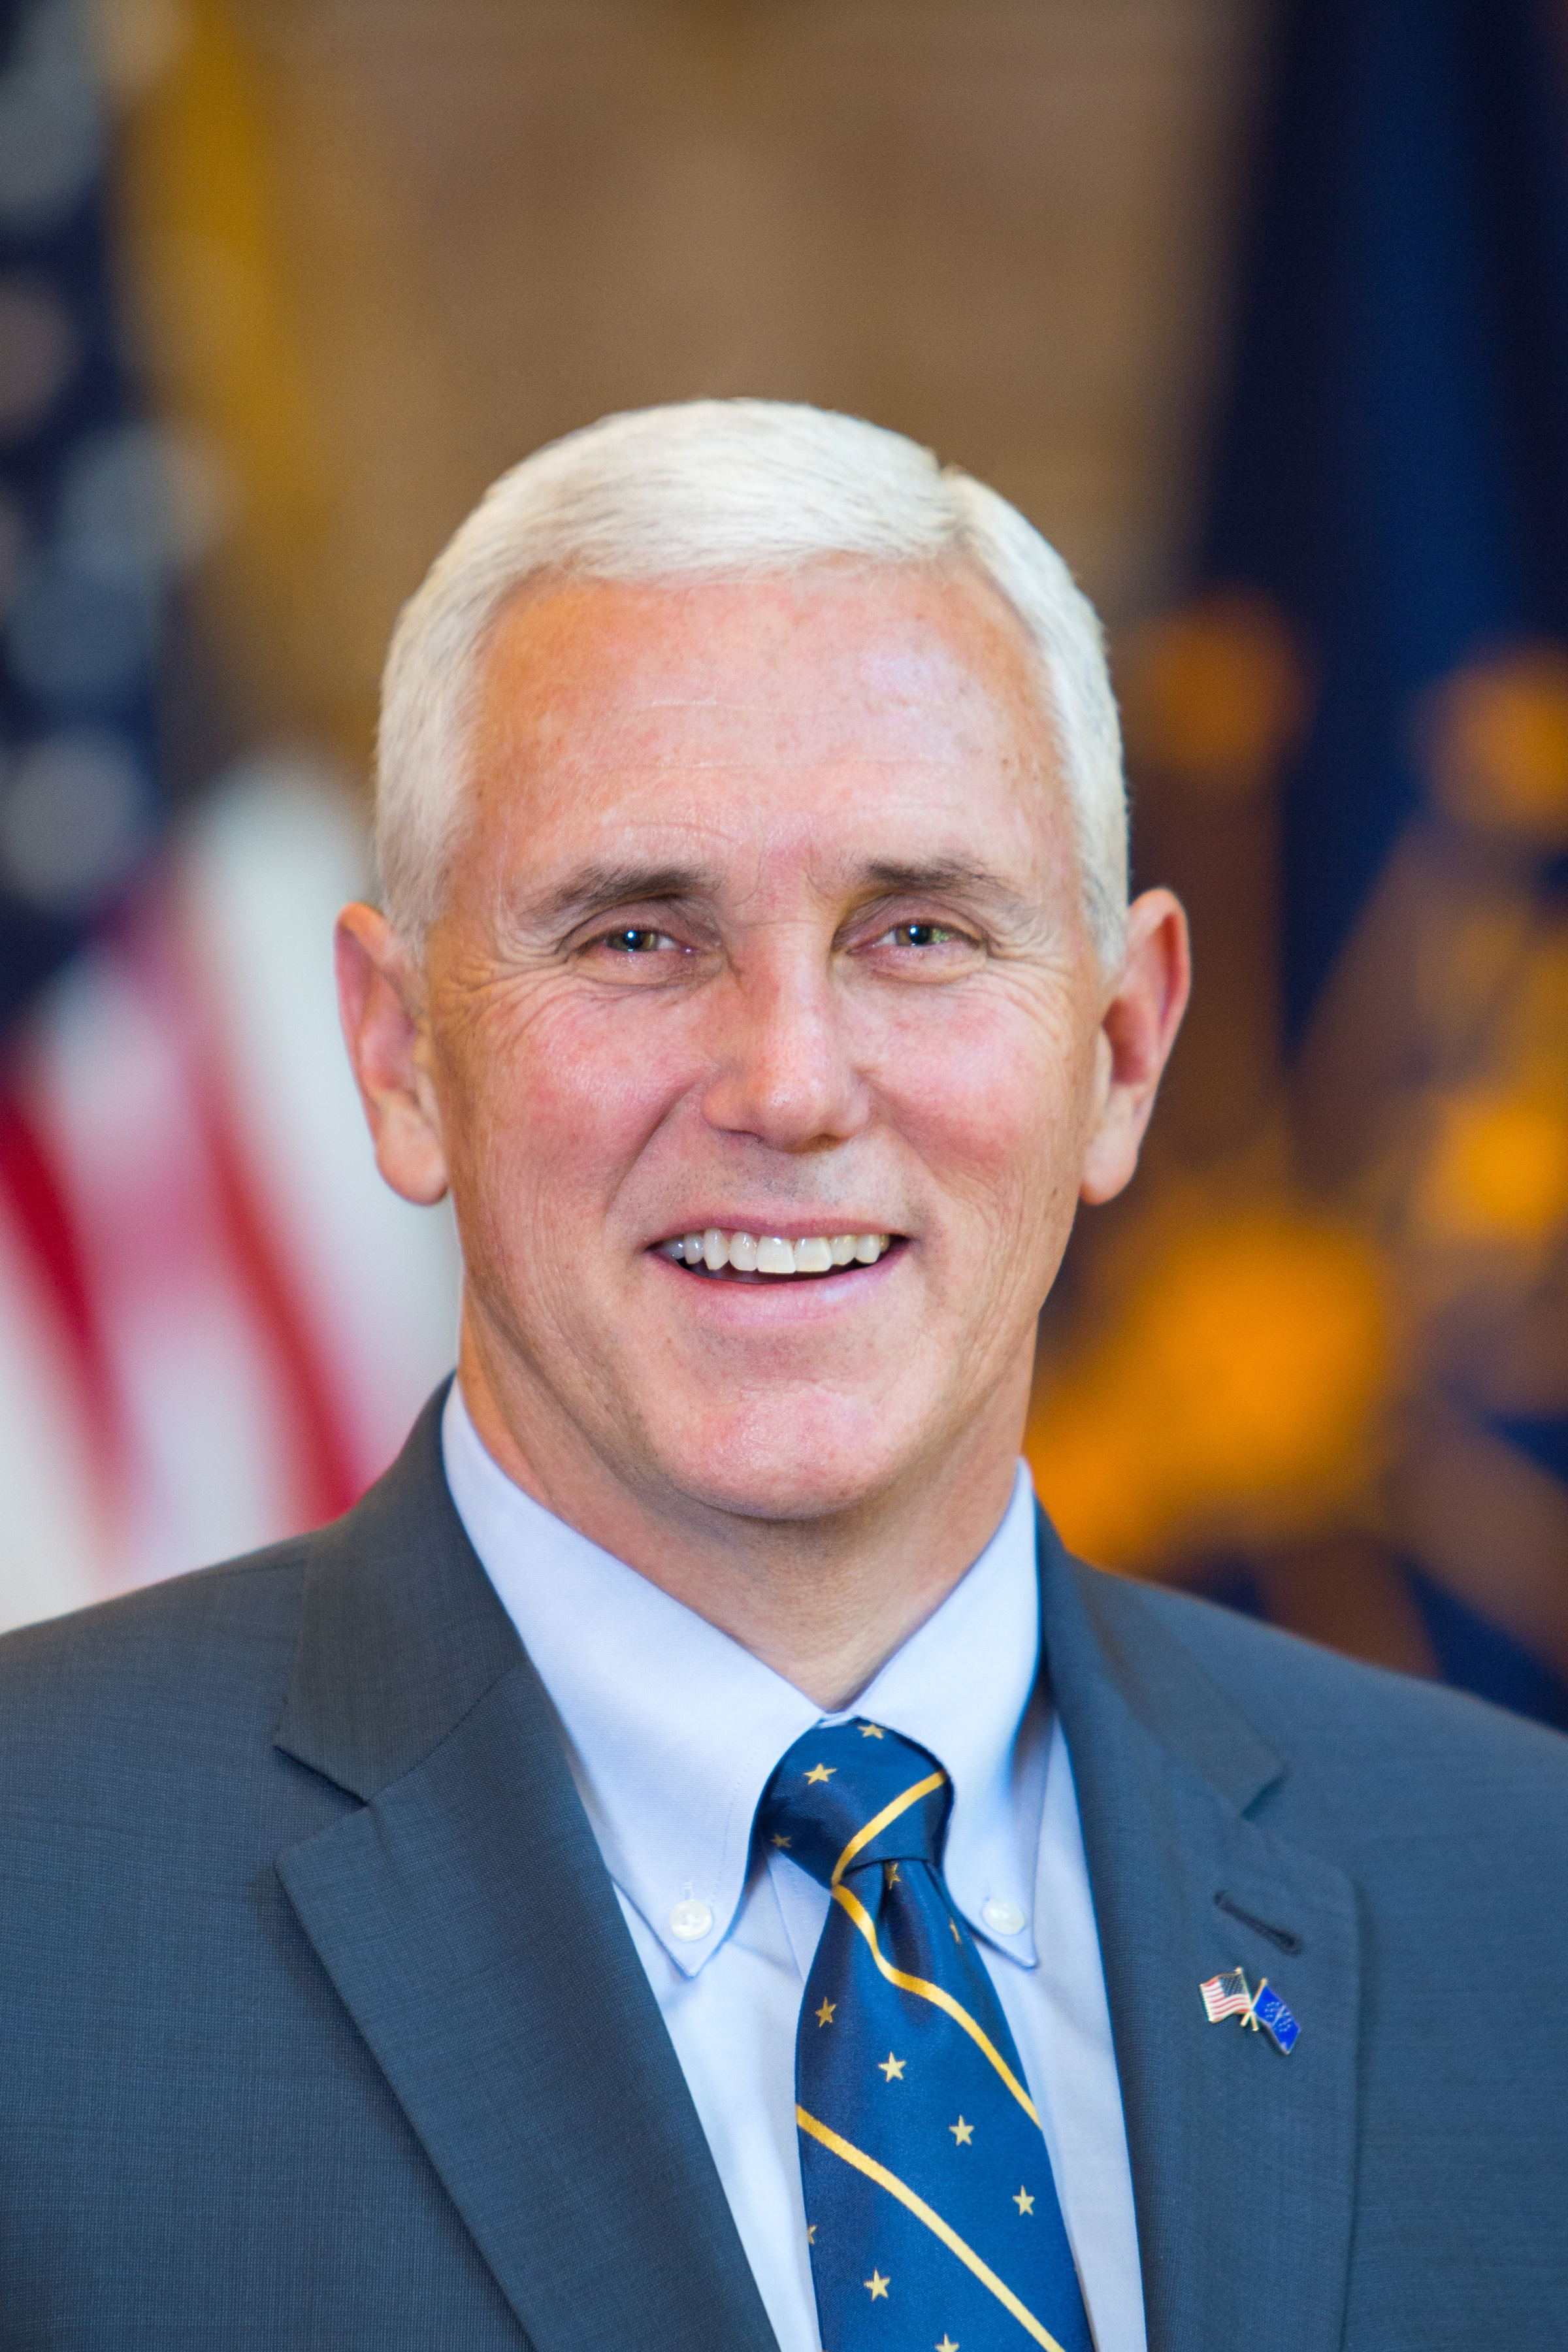 Governor Pence: About The Governor